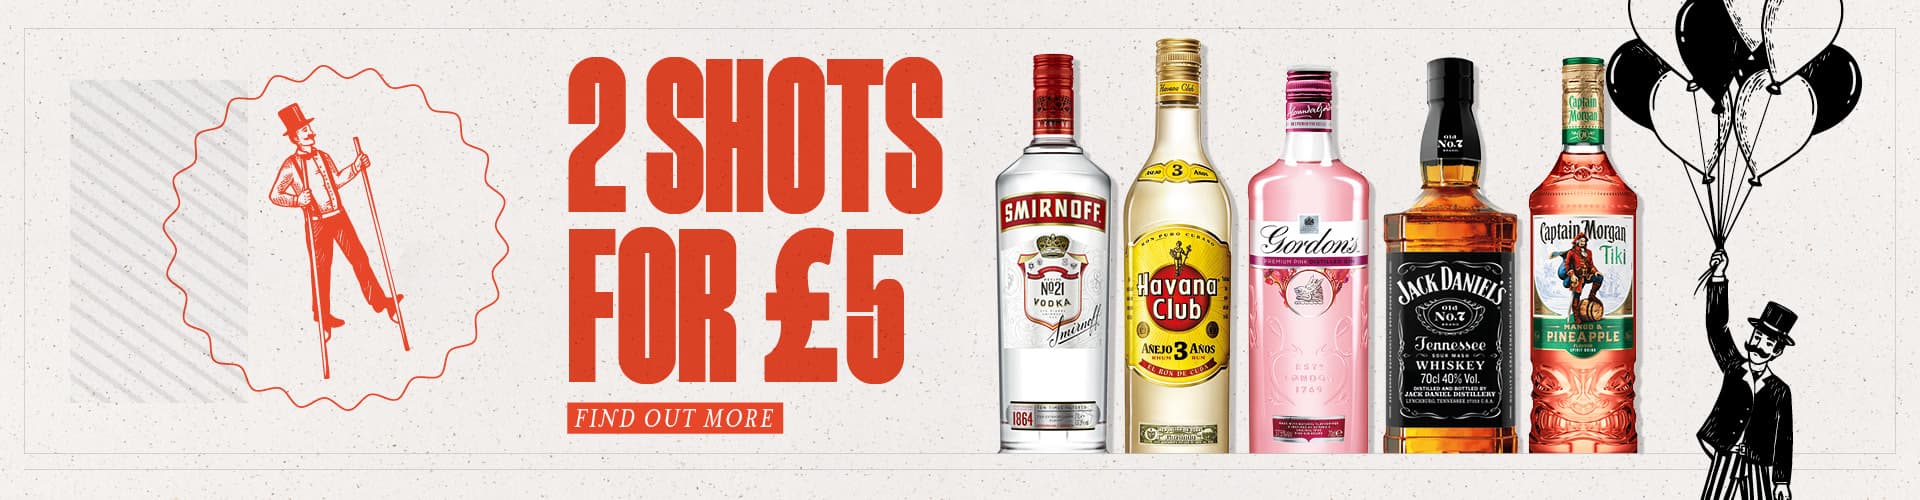 2 Shots for £5. Find out more.